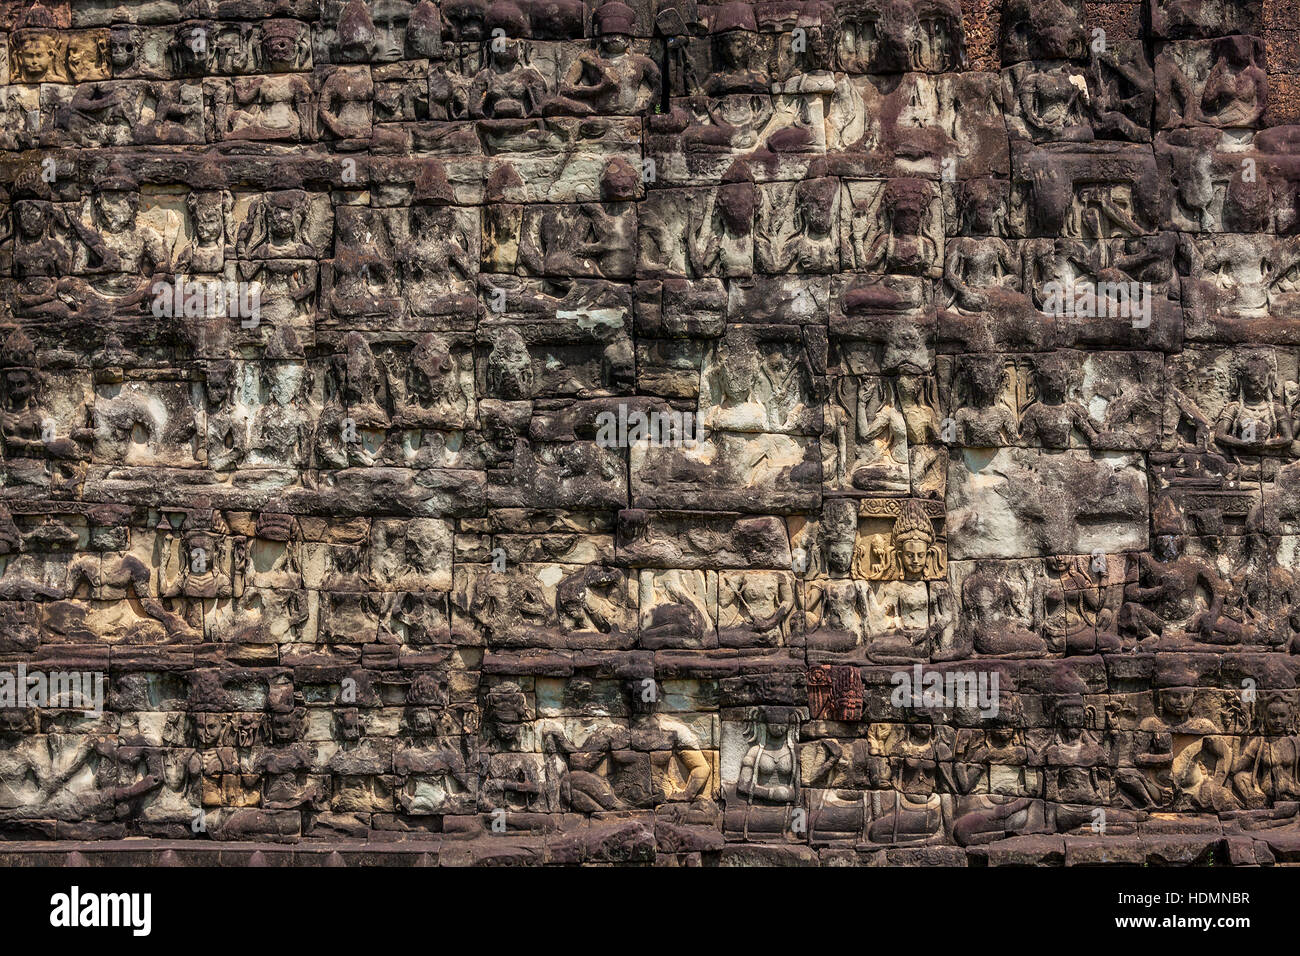 Segment of a wall covered with intricate carvings at the Terrace of the Leper King, Siem Reap, Cambodia. Stock Photo